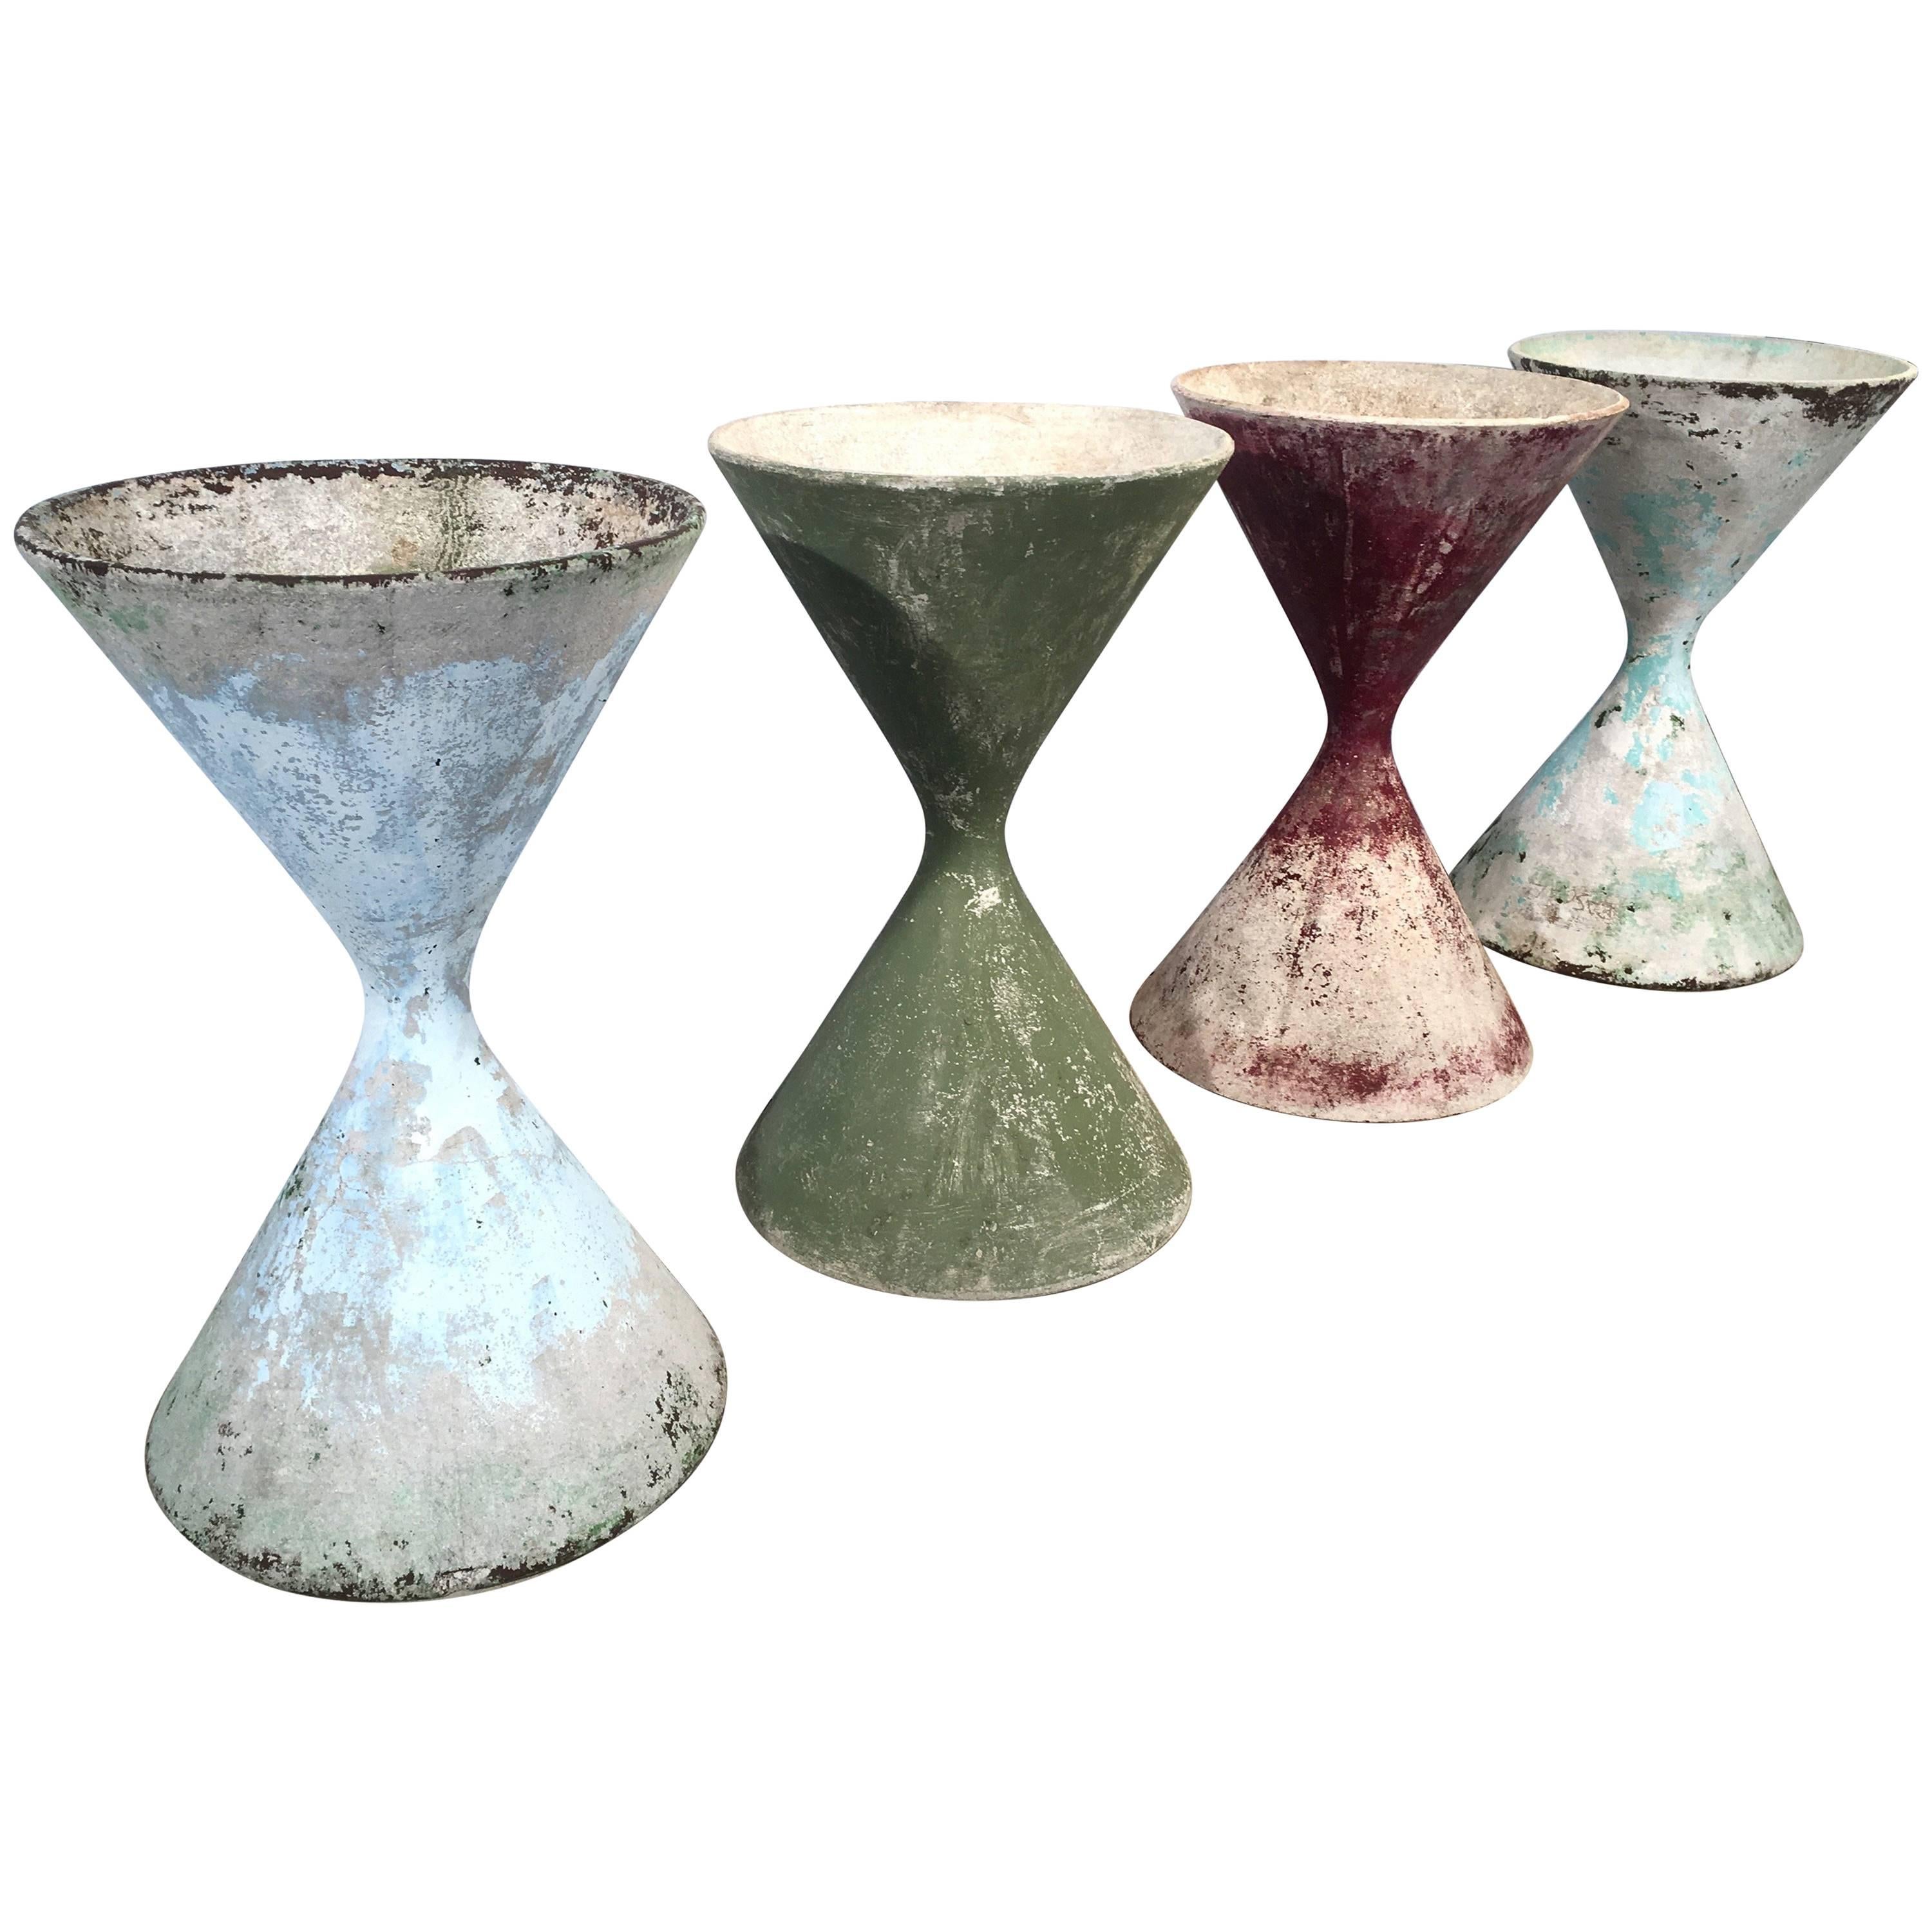 Two Pairs of Small Hourglass "Diabolo" Willy Guhl Planters For Sale